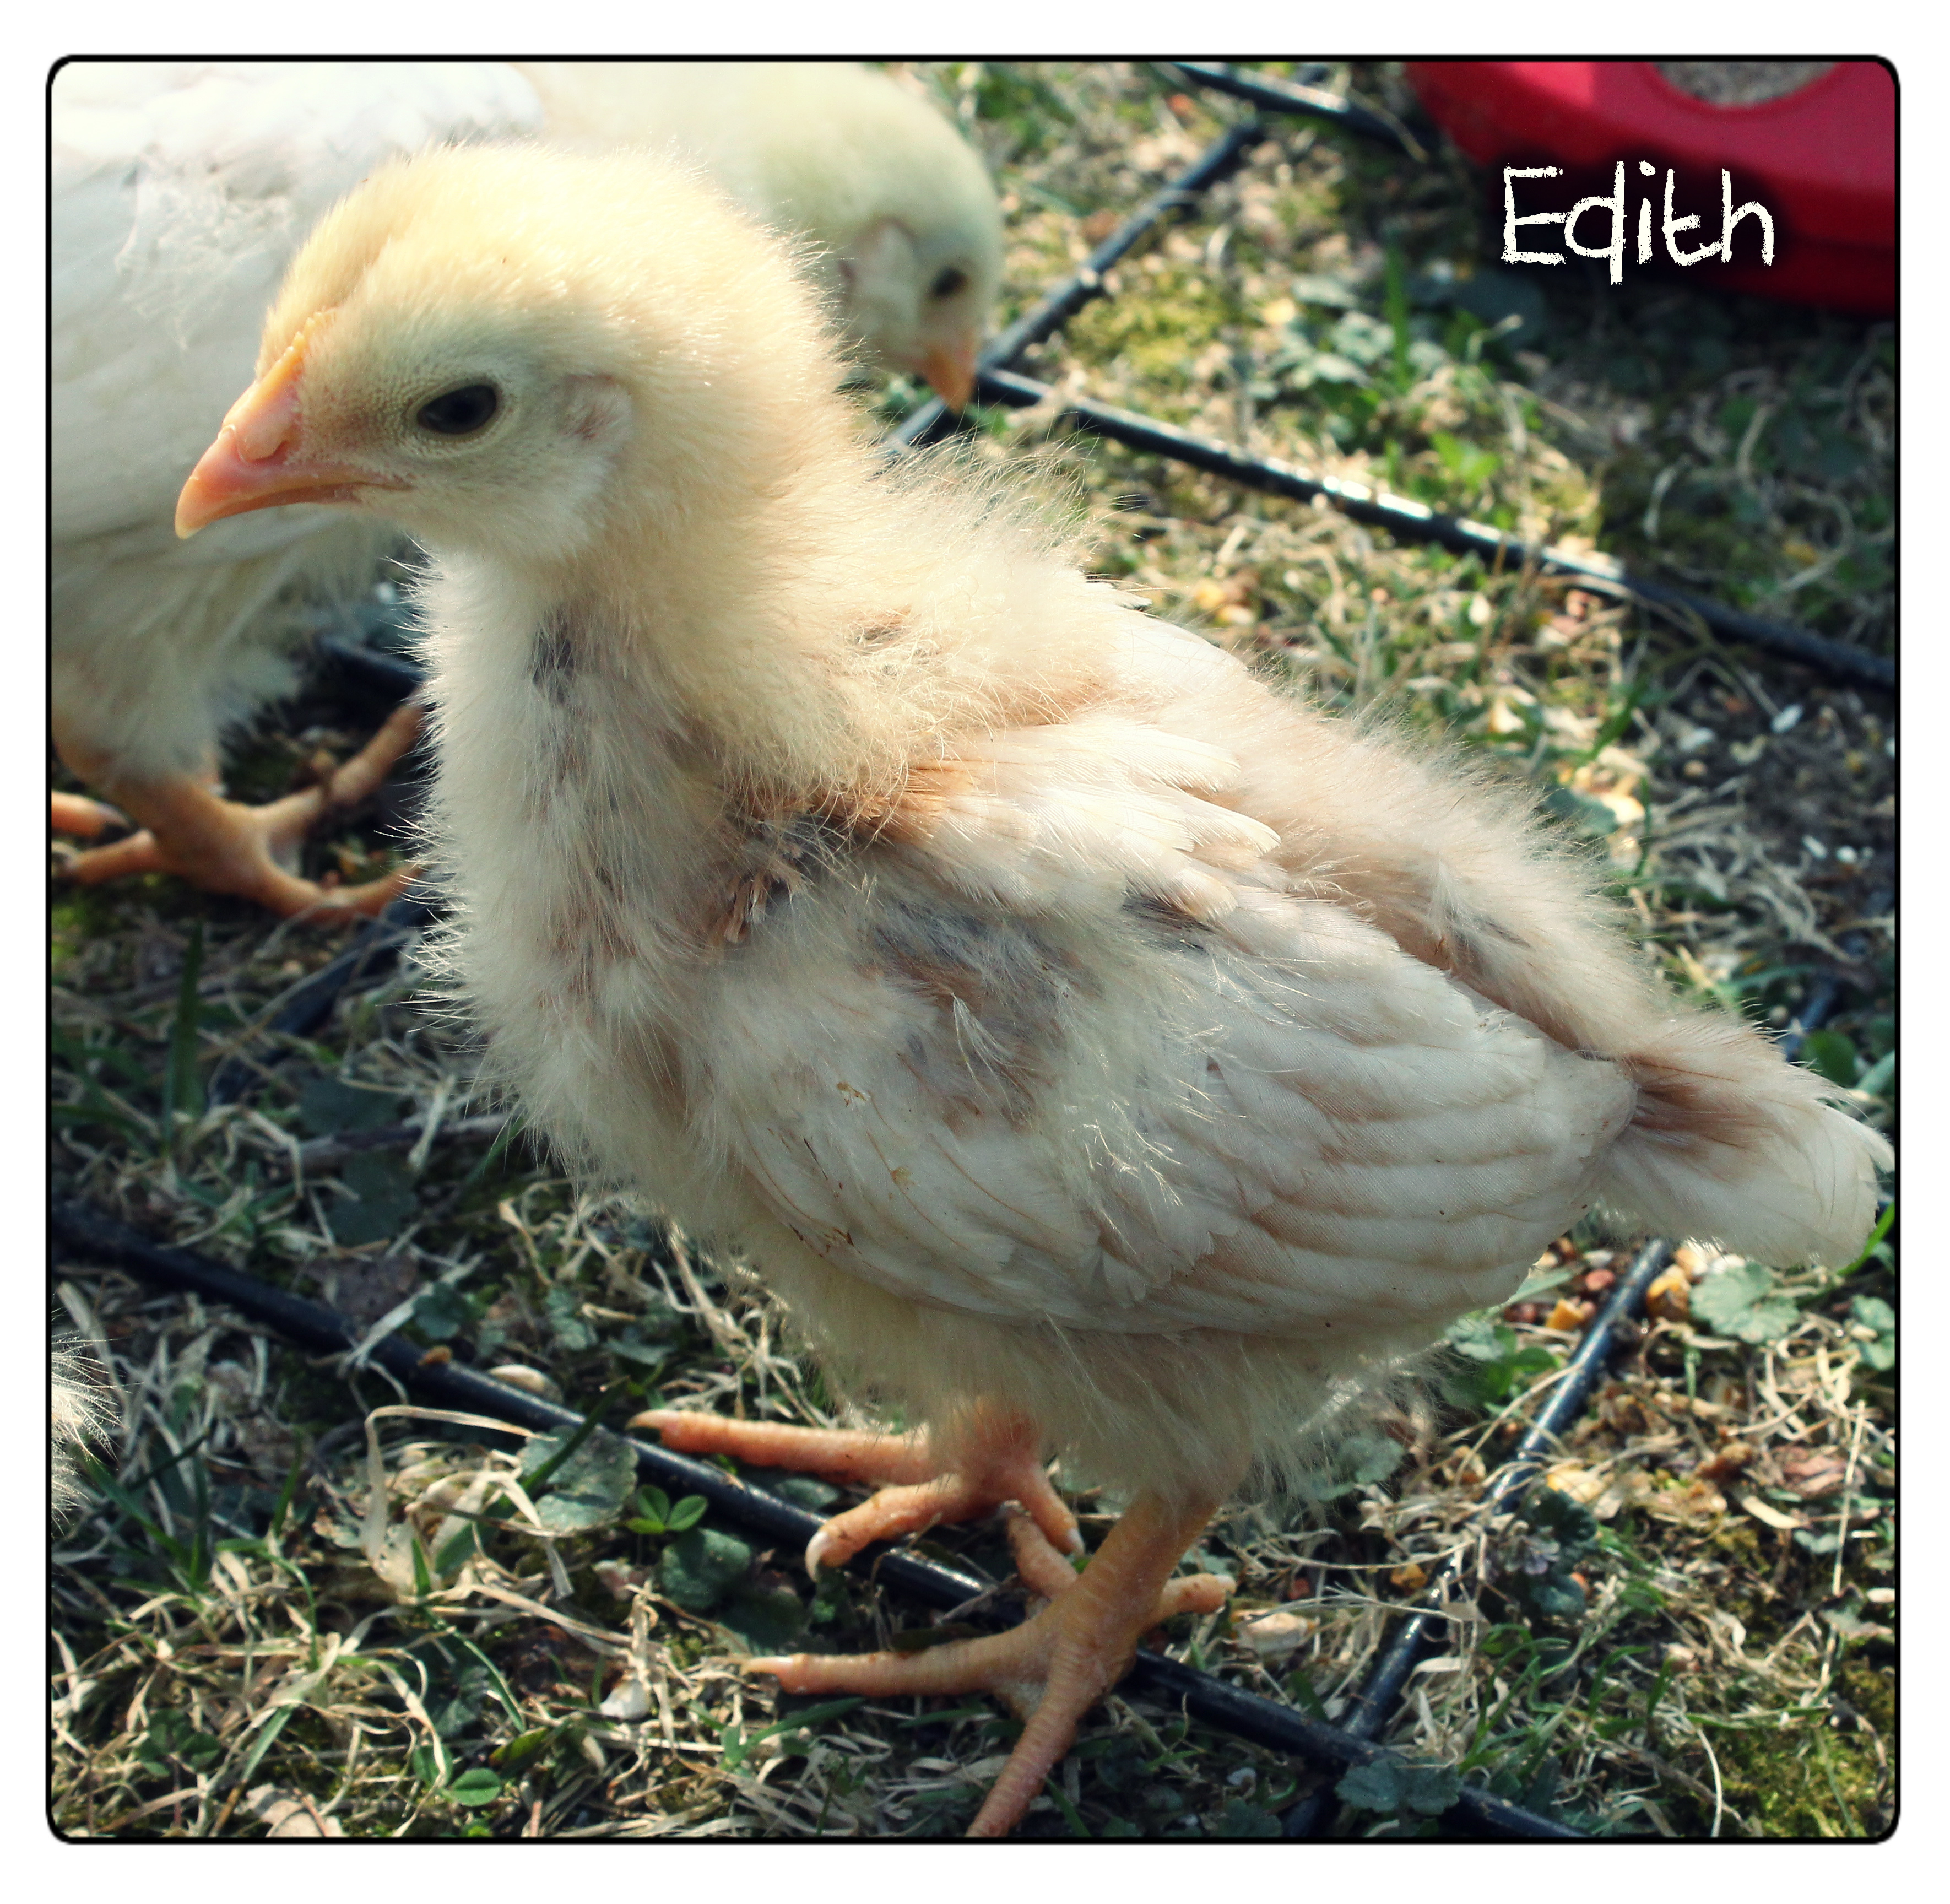 Edith: 2-week-old Red Sex Link ... I am suspecting might be and Eddie, due to prominent tail feathers. We'll see ...